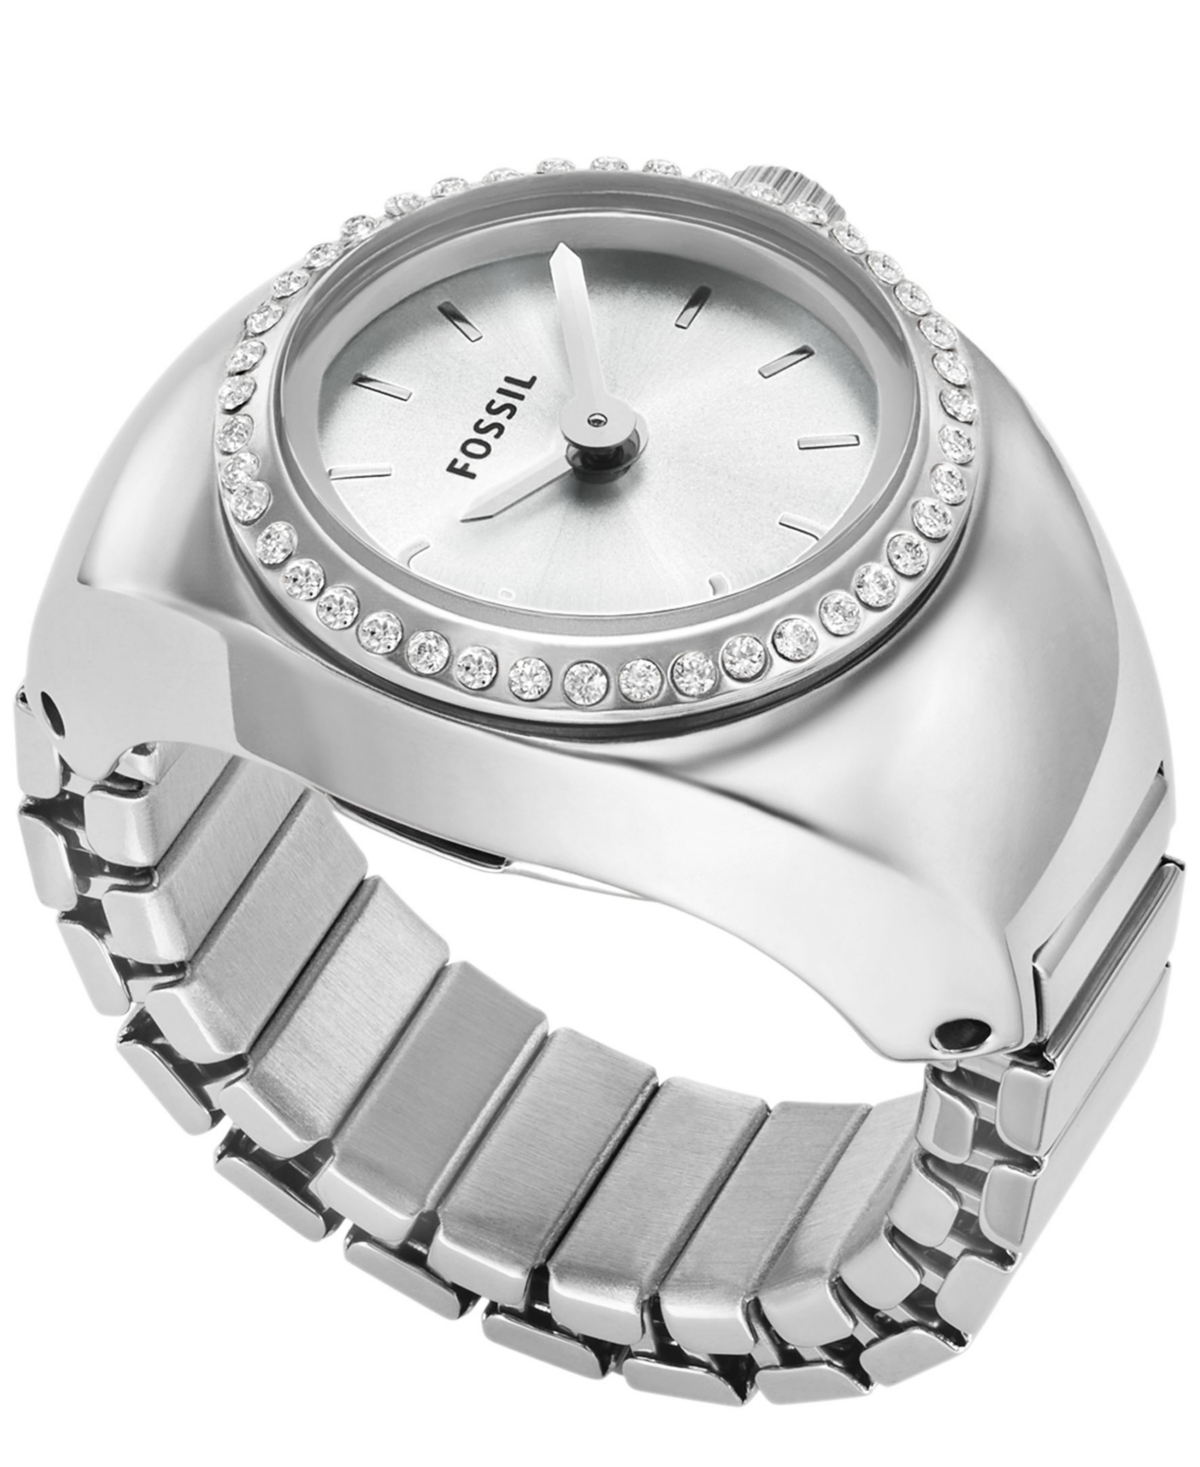 Fossil Women's Watch Ring Two-hand Silver-tone Stainless Steel 15mm